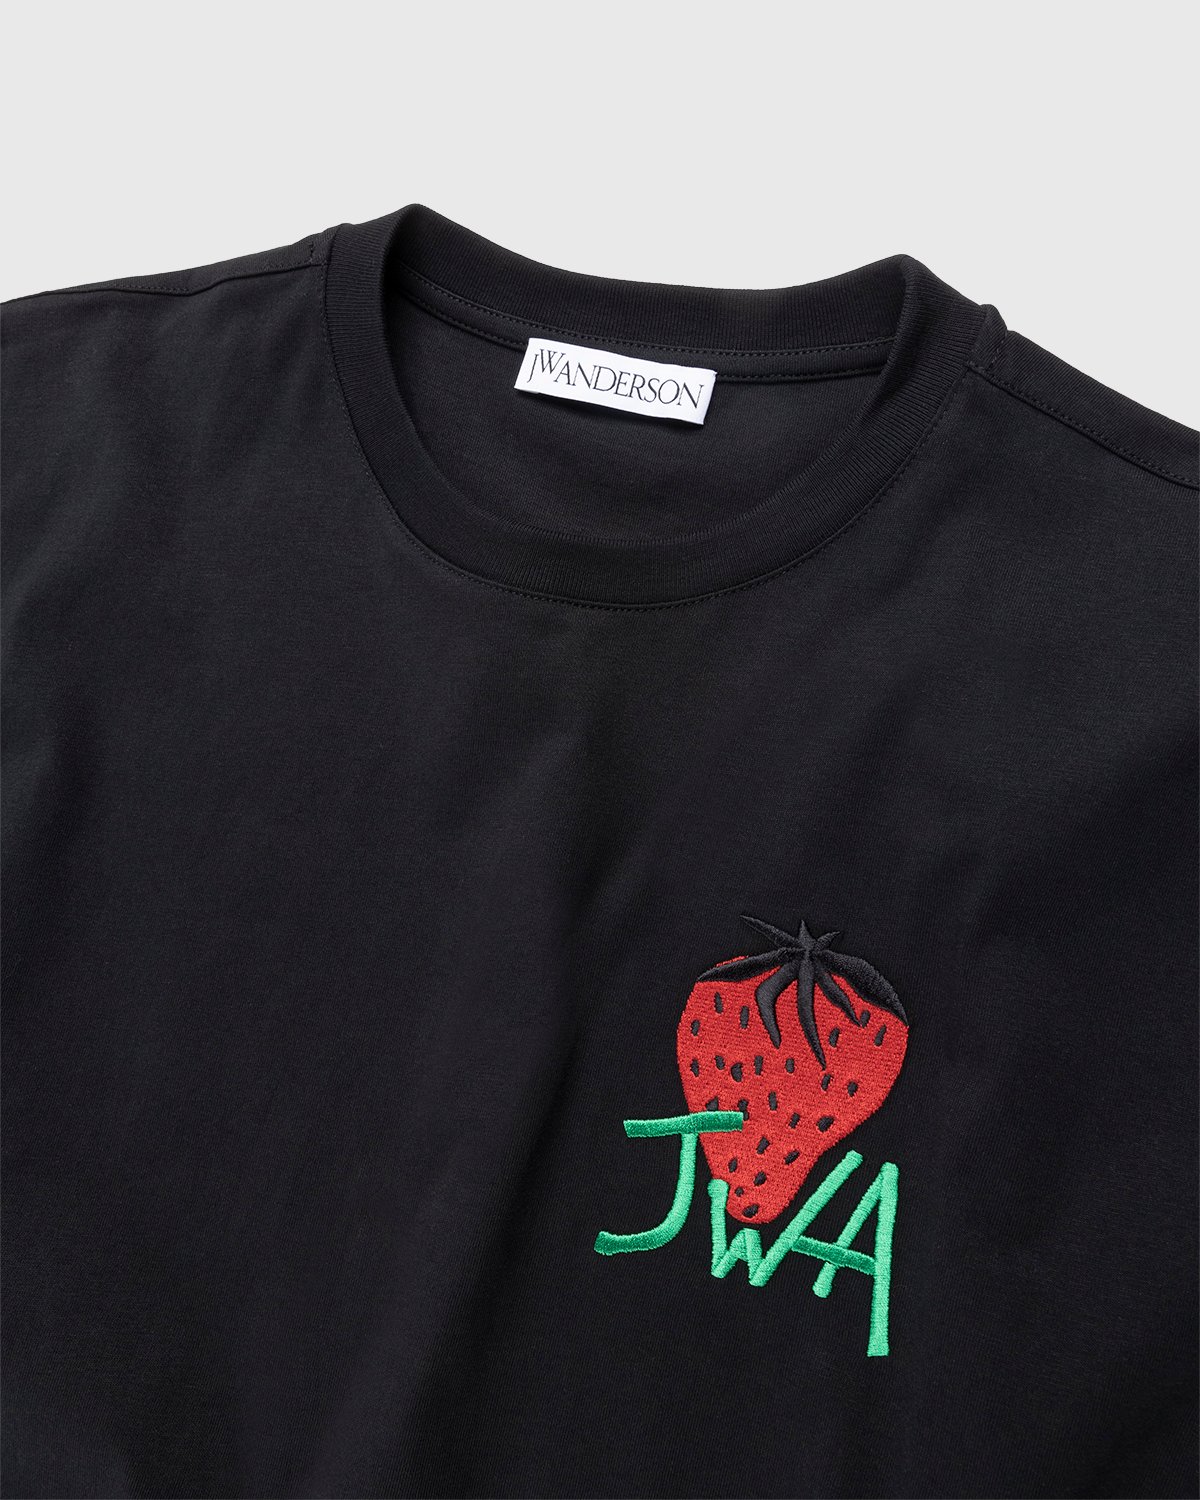 J.W. Anderson - Embroidered Strawberry JWA T-Shirt Black - Clothing - Black - Image 3